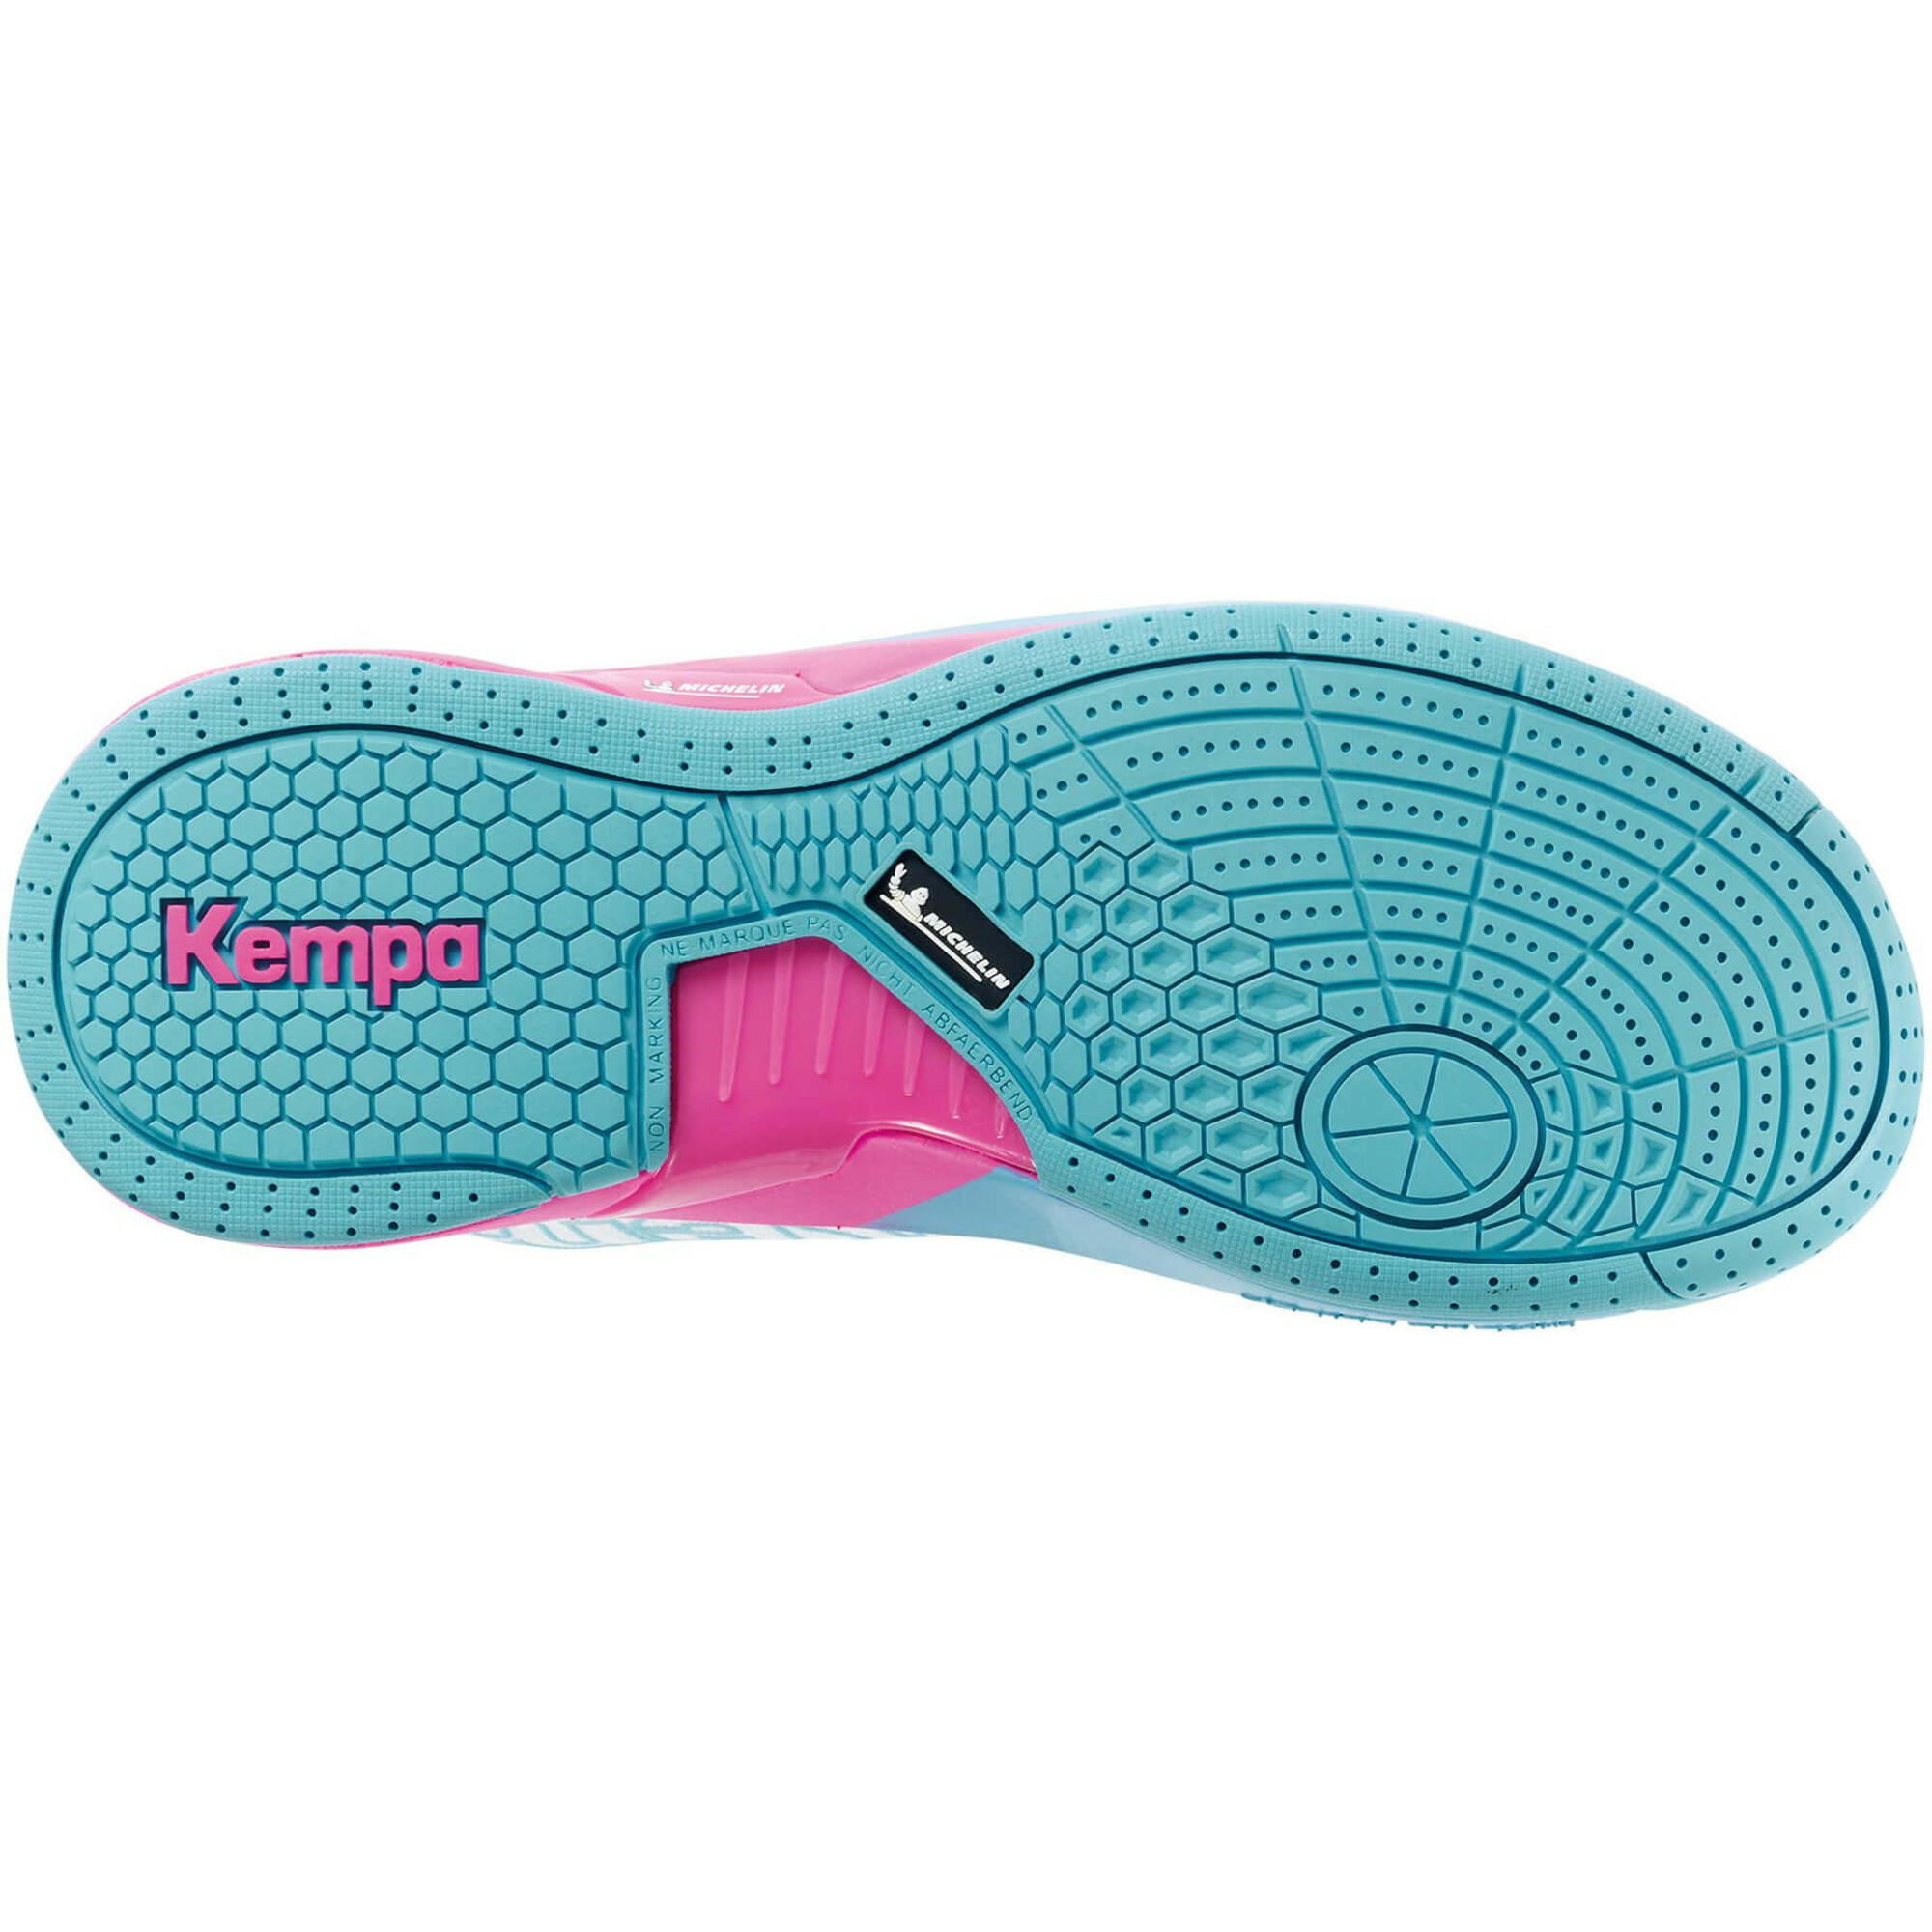 kempa chaussures femme attack pro 2.0 donna